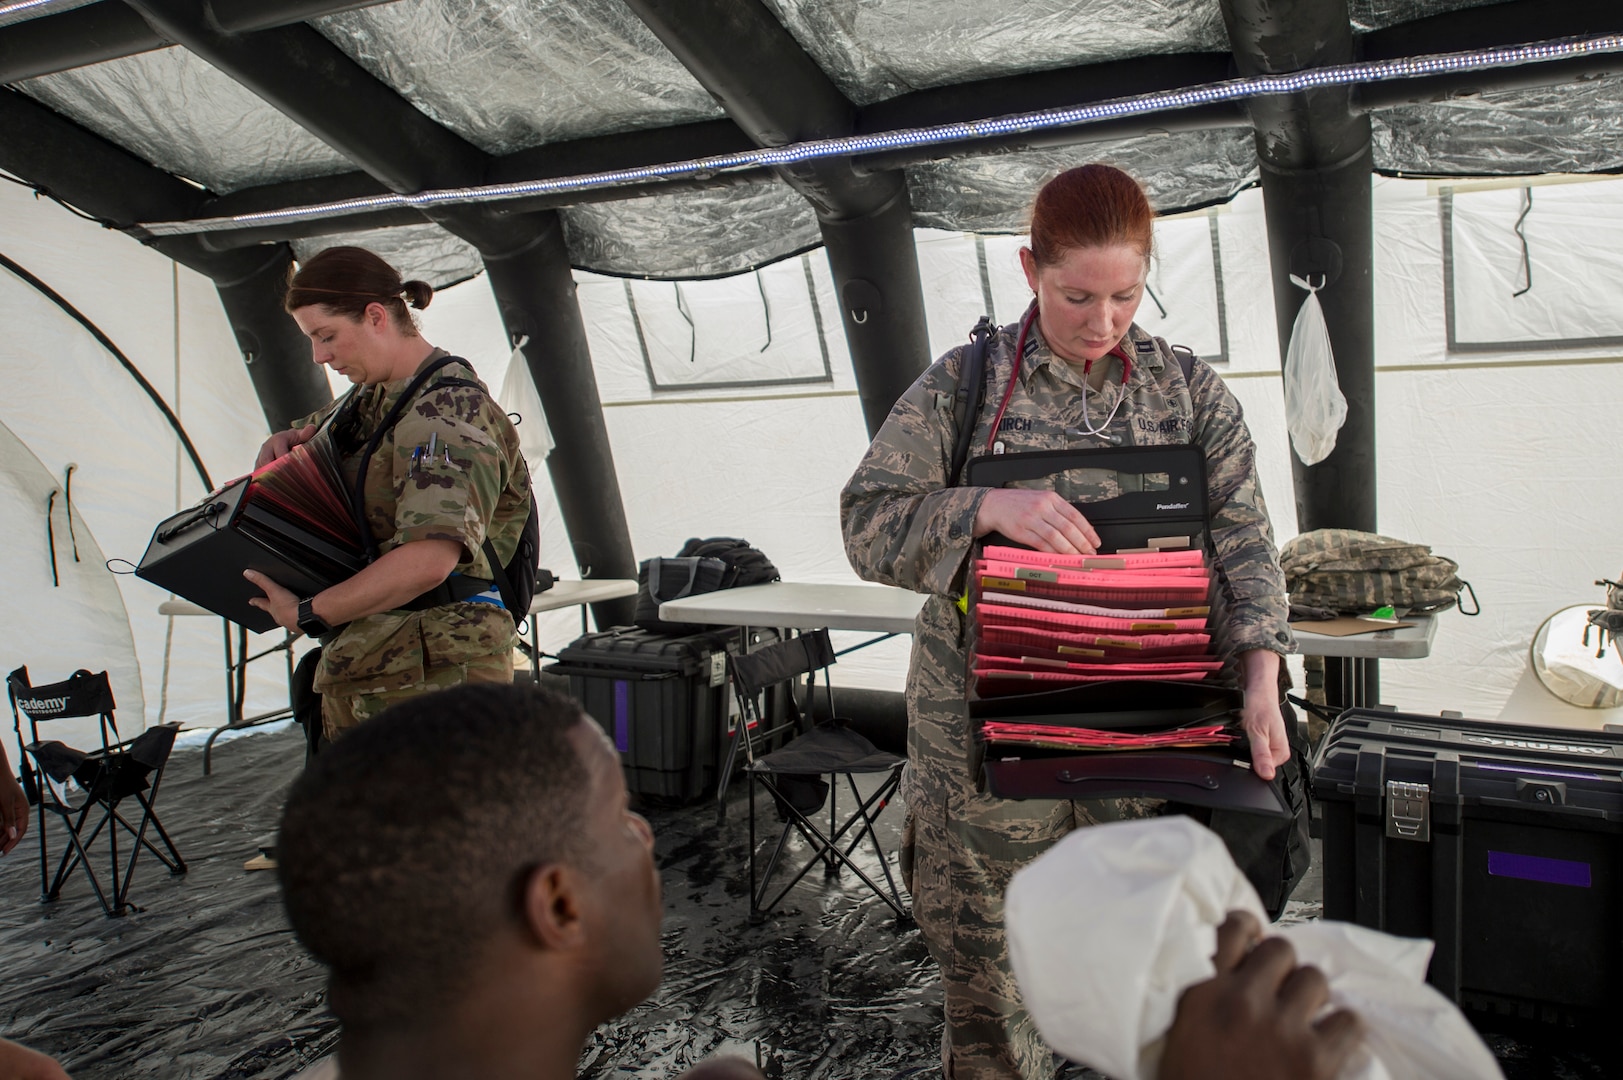 U.S. Air Force Master Sgt. Nichole Stafford (L), the nursing services superintendent and Capt. Shyla Kirch (R), a nurse, both with the 116th Medical Group, Detachment 1, give participants paperwork during rest cycles at FEMA exercise Shaken Fury 2019 on June 5 in Millington, Tenn. Forty-four medical and communications personnel with the 116th Air Control Wing, Georgia Air National Guard, served on the CBRNE Enhanced Response Force working alongside more than 200 Georgia National Guard soldiers, testing the synergy necessary to support the community during natural disasters like the simulated earthquake in the exercise. (U.S. Air National Guard photo by Tech. Sgt. Nancy GoldbergerRELEASED)